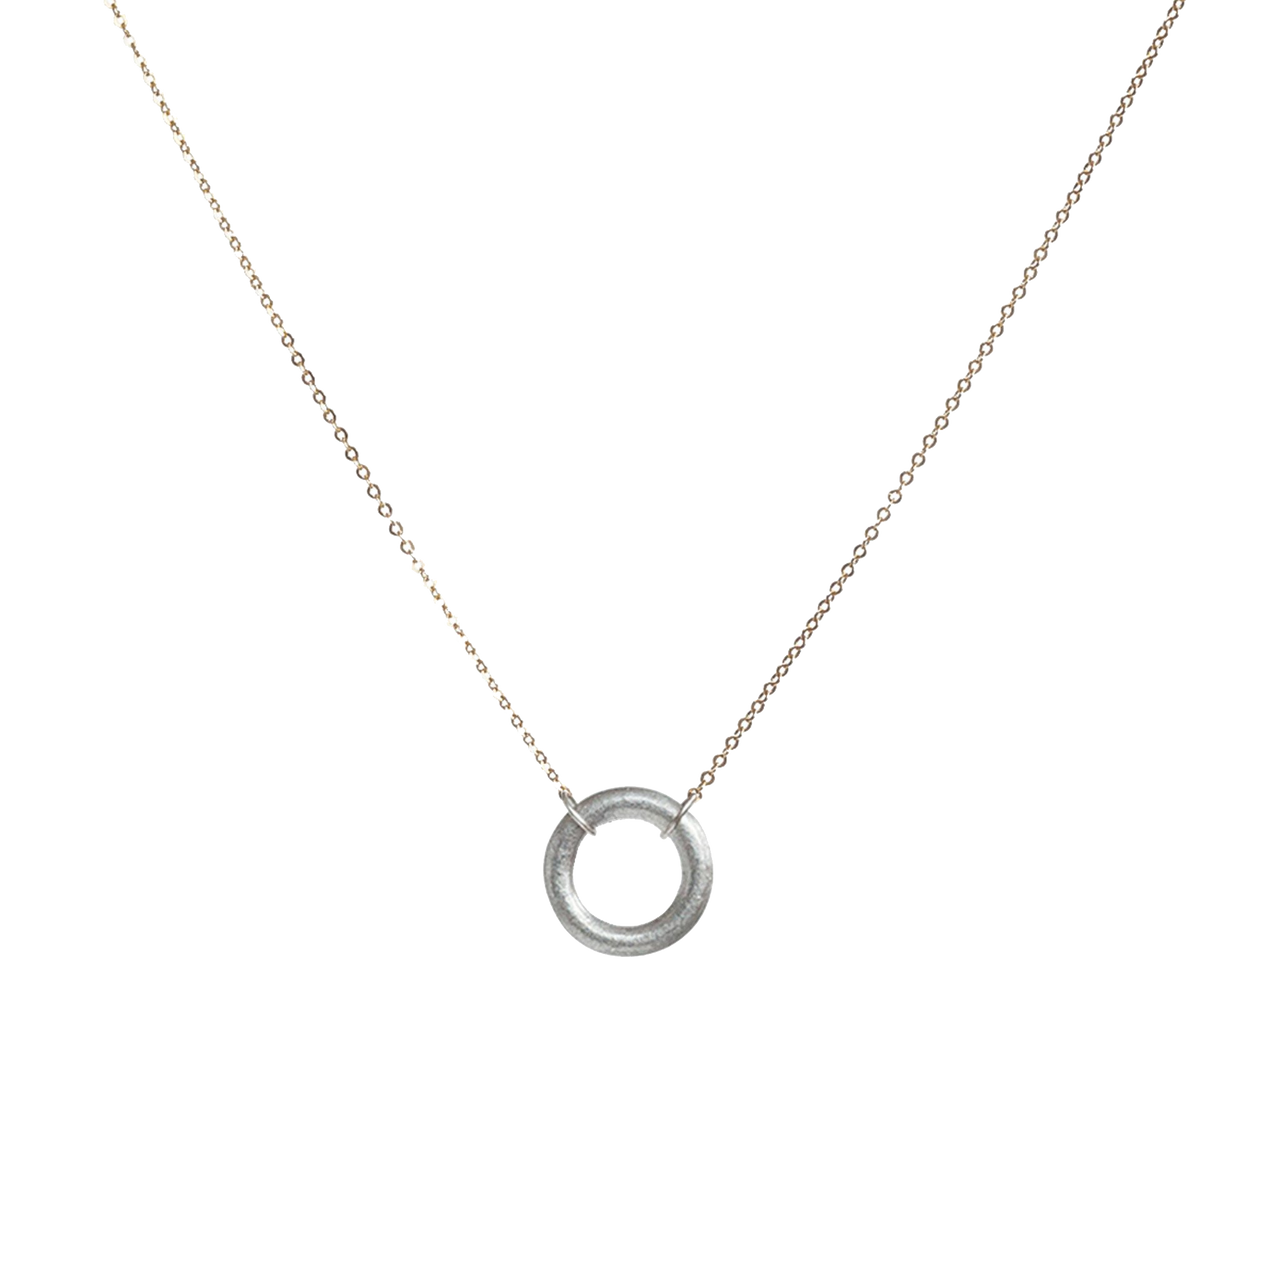 ARTICLE22 Virtuous Full Circle Necklace Sterling Silver | necklaces | Australian Jewellery | Jewellery Store | Jewellery shops | Online Jewellery | Gifts | Presents | Xmas Presents | Birthday Present | Wedding Gift | Silver chain | Upcycle Studio